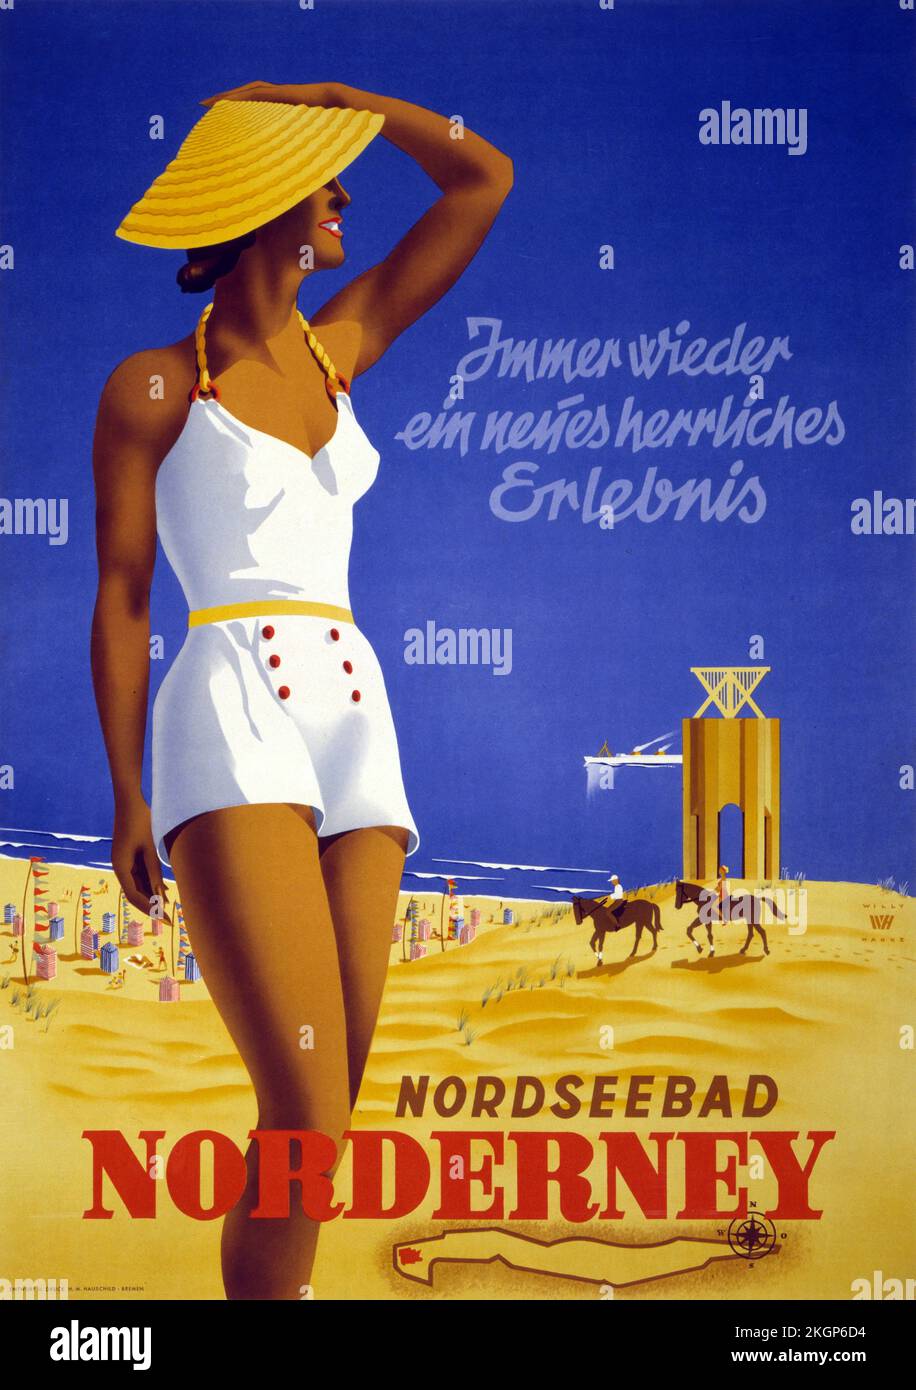 Nordseebad Norderney by Willy Hanke (dates unknown). Poster published in 1930 in Germany. Stock Photo